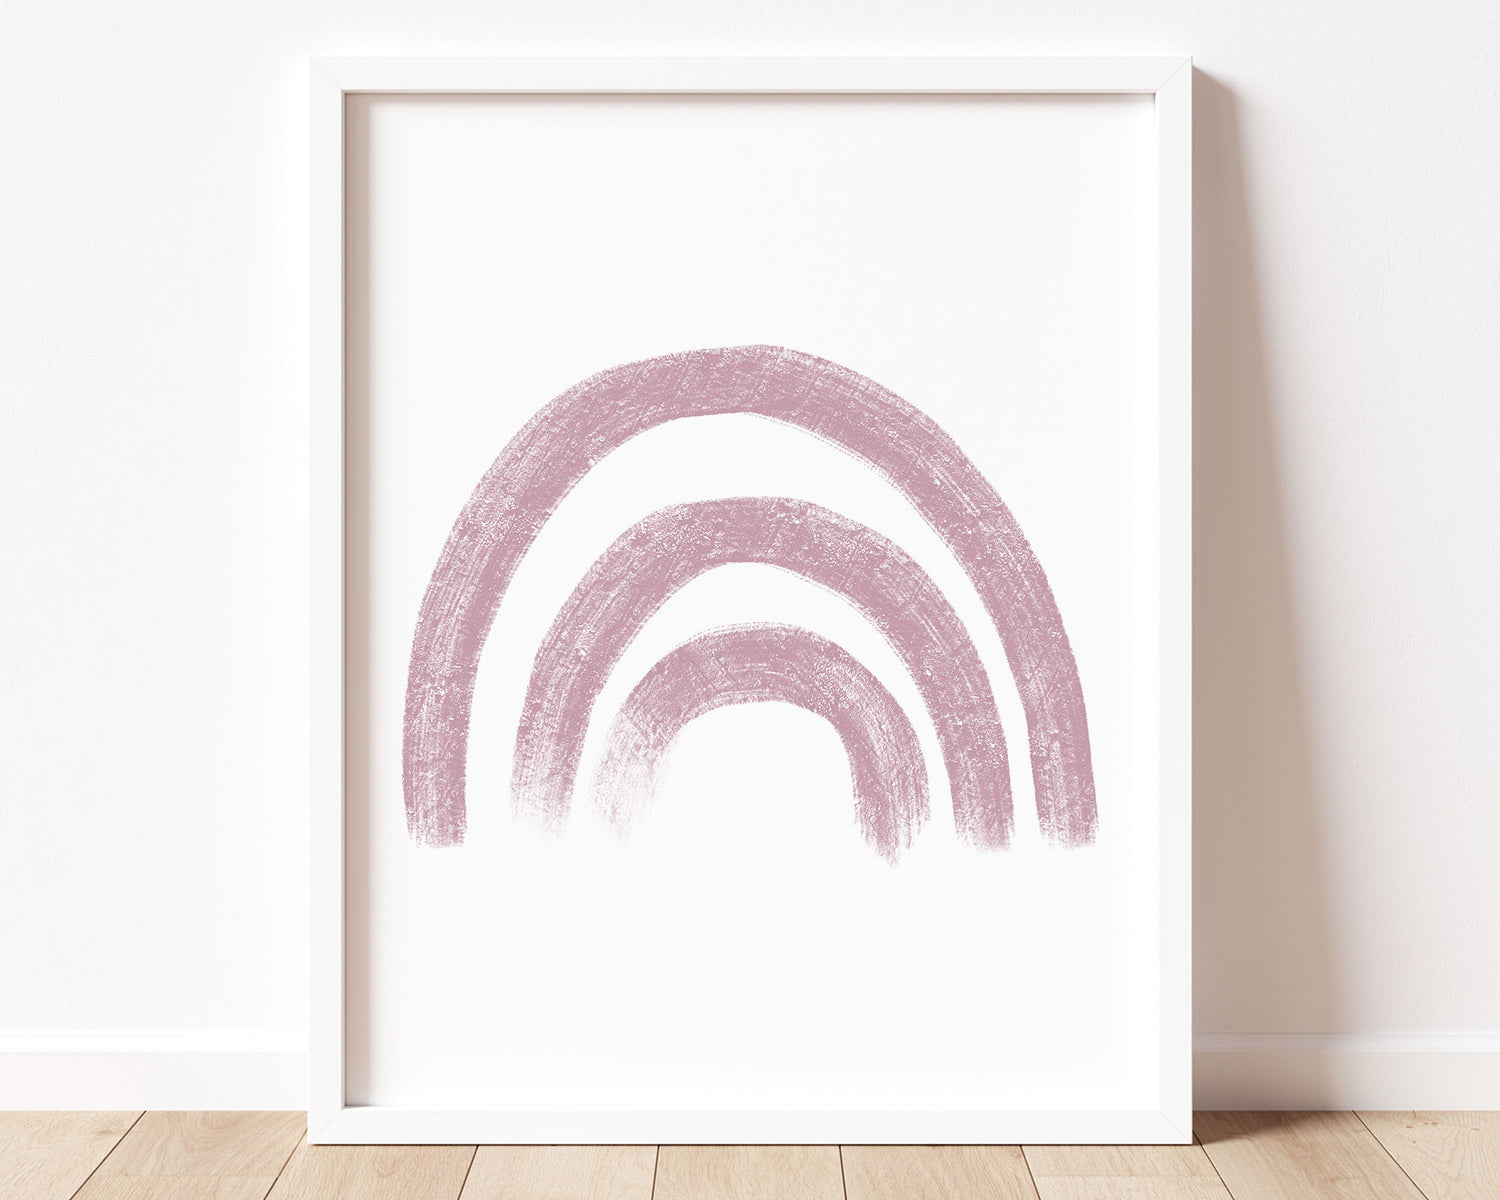 Mauve rainbow in chalky brushstroke illlustration style perfect for Baby Nursery Décor, Little Boys Bedroom Wall Art, Toddler Girls Room Wall Hangings, Kiddos Bathroom Wall Art and Childrens Playroom Décor.